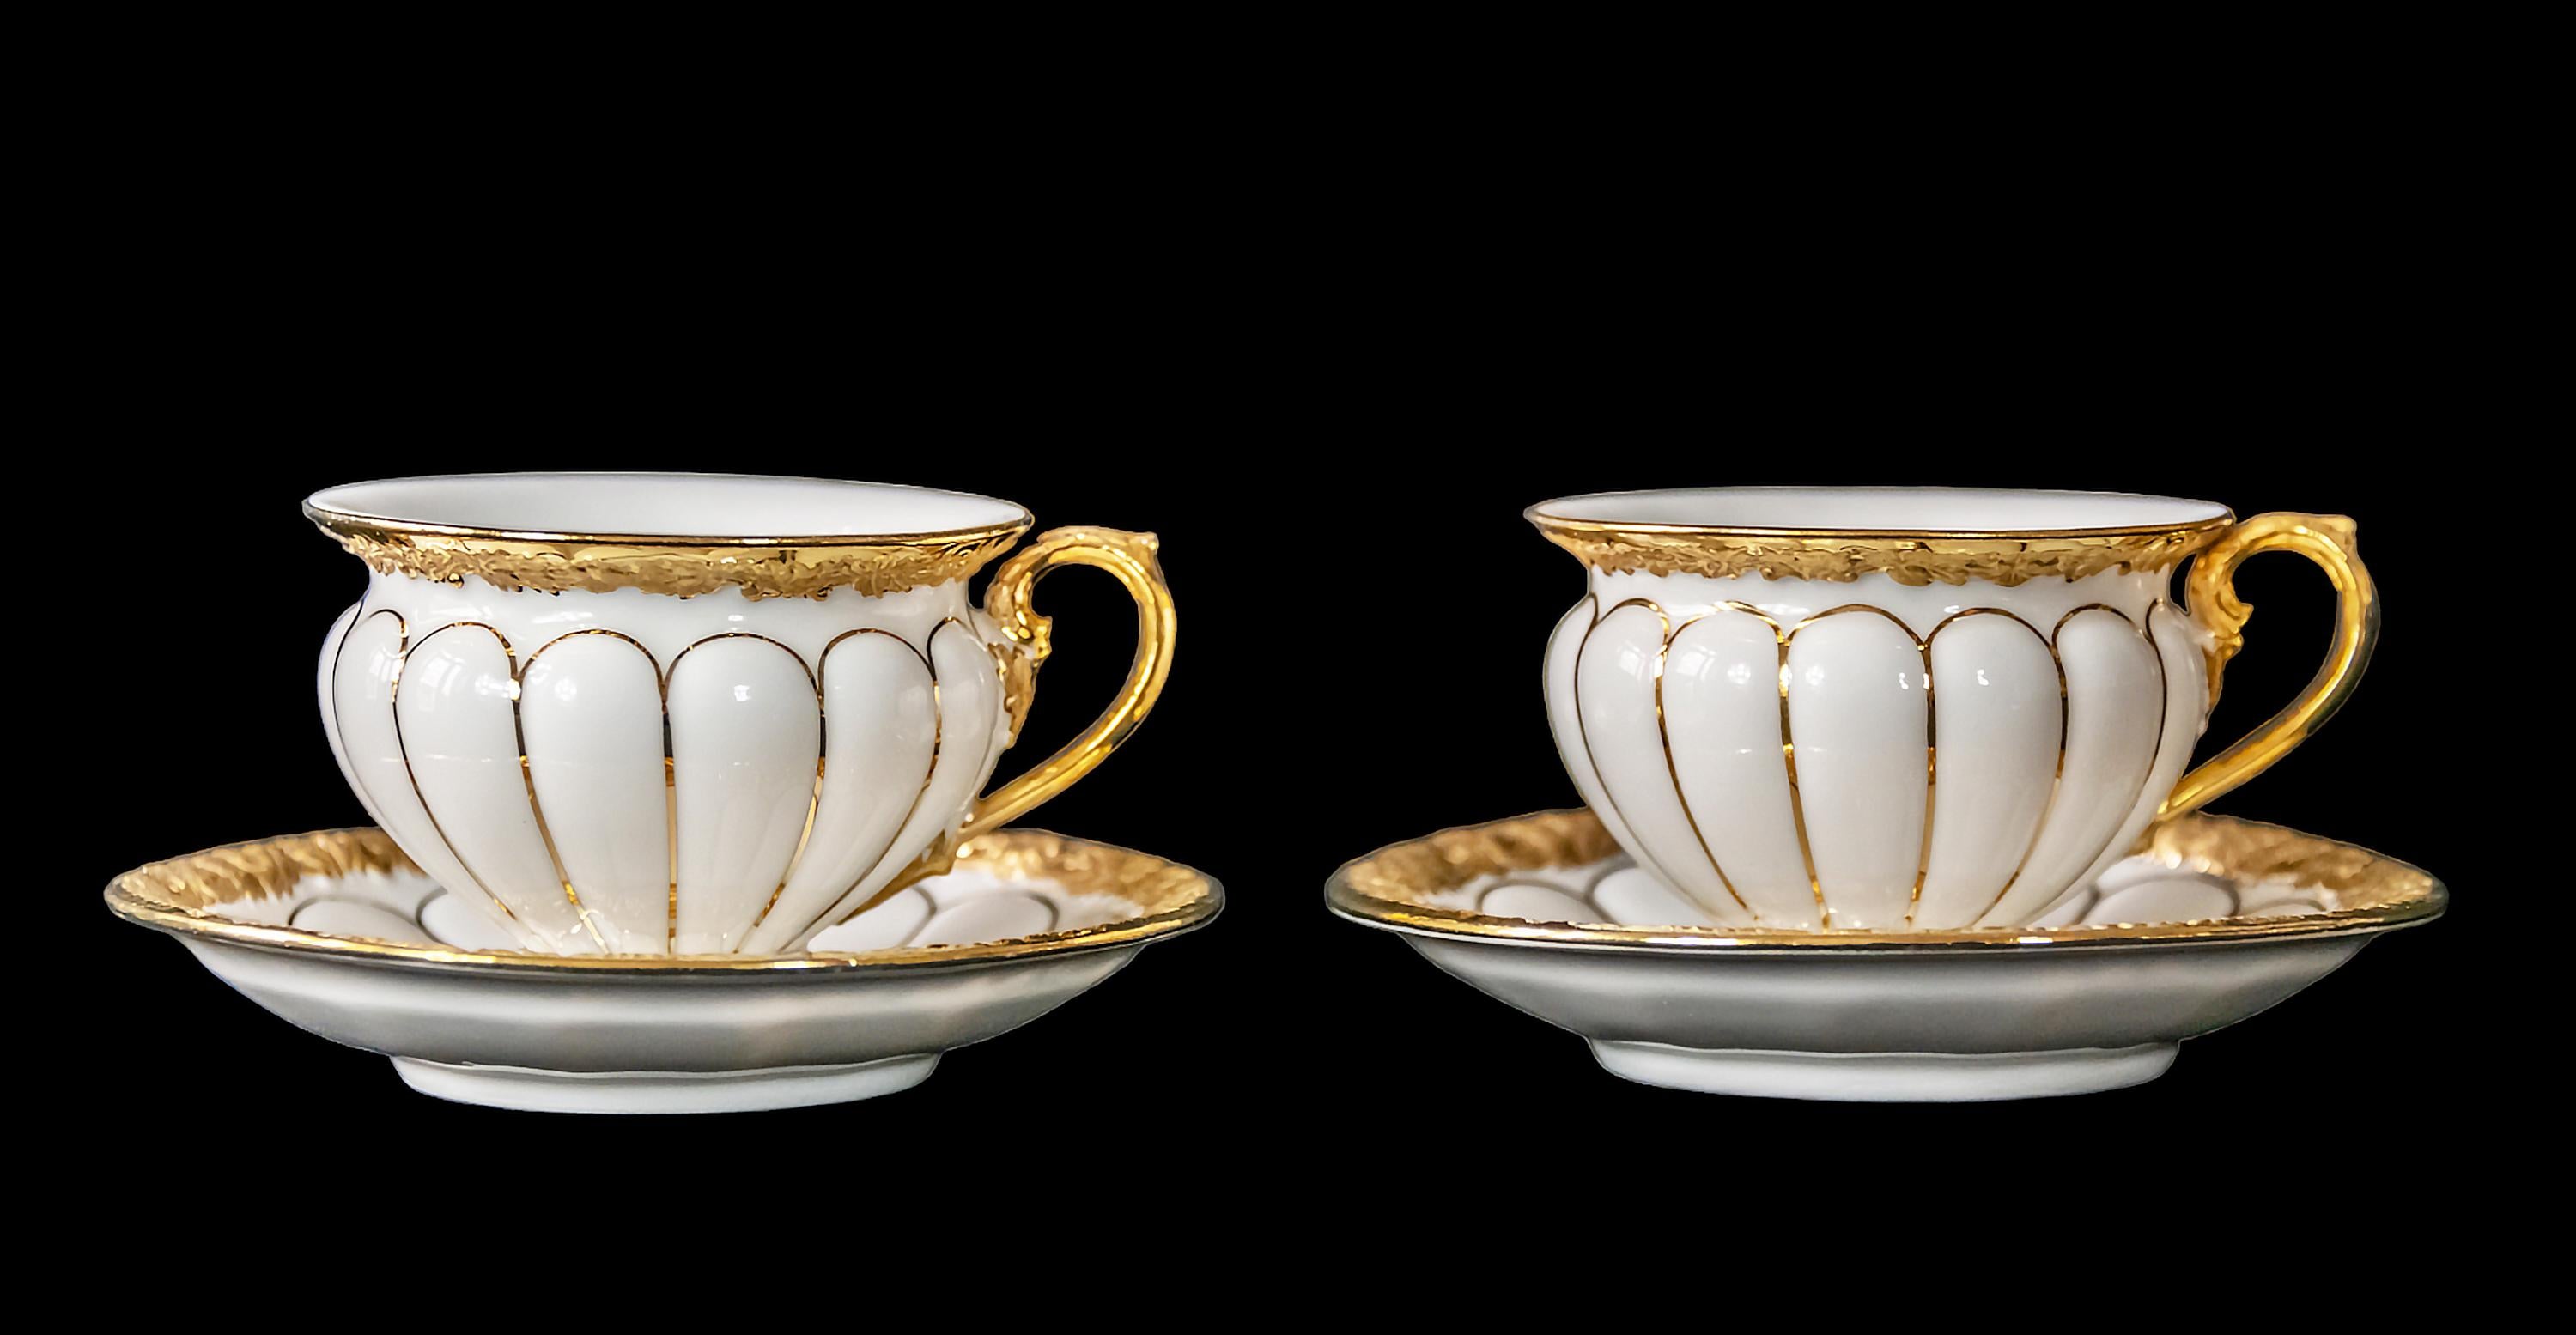 Pair of Meissen Porcelain coffee cups with saucers richly decorated with gold.
Measures:
Cup: h 5 x7.5 x 9 cm
Saucer: 12 cm

.